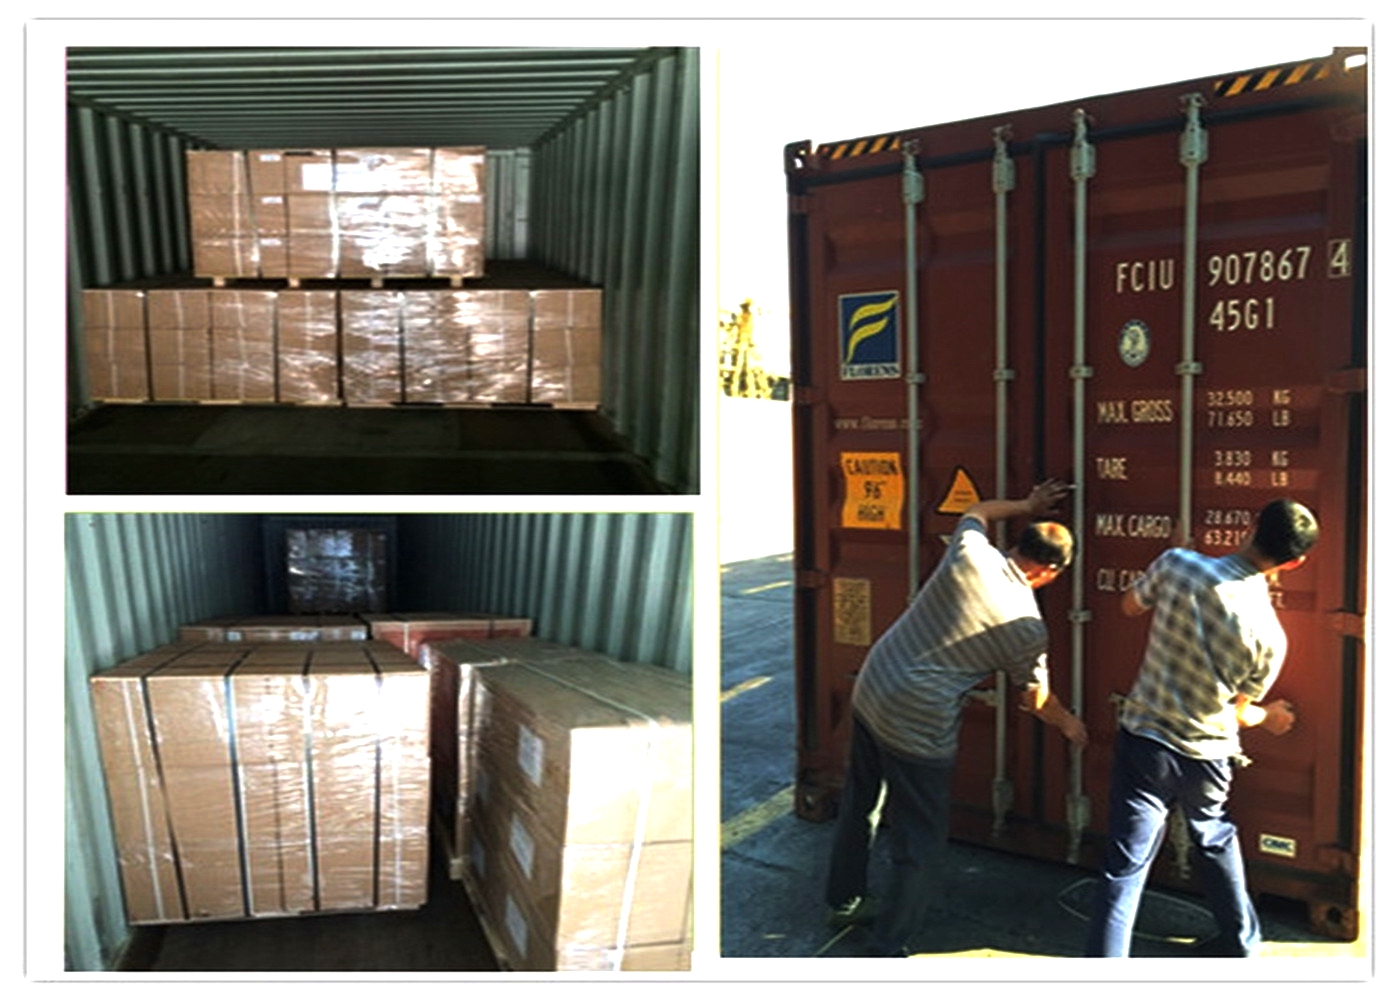 SHIPMENT PACKAGES BY SEA FREIGHT